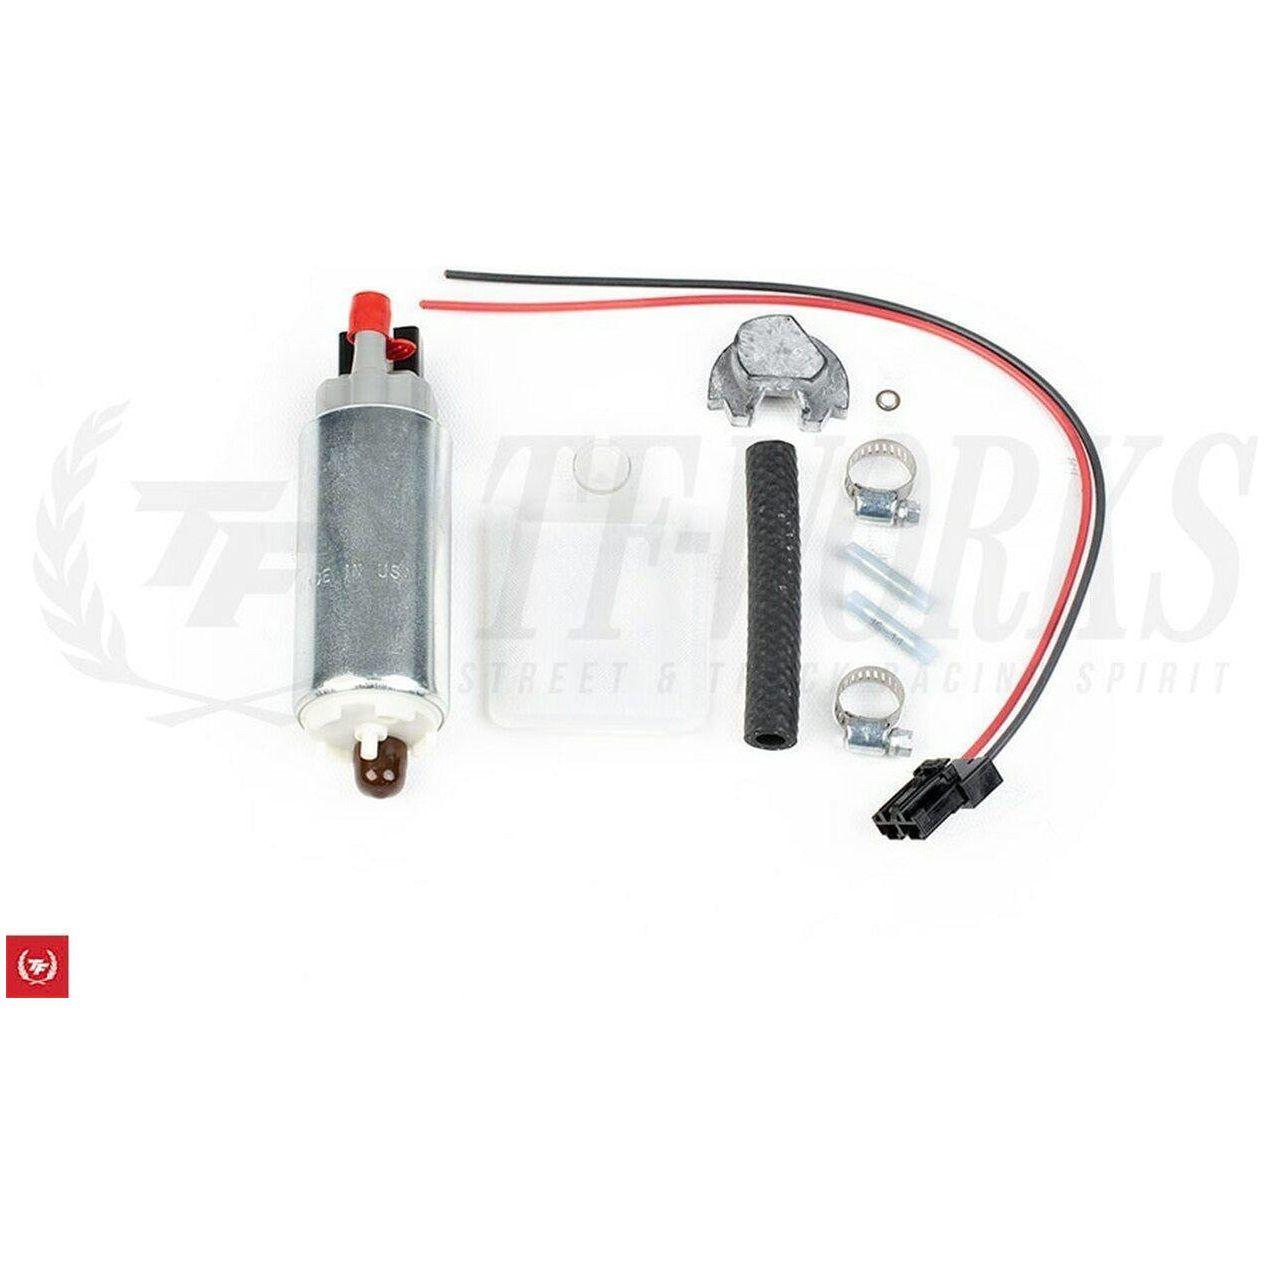 Walbro fuel pump kit for 89-94 240SX - SMINKpower Performance Parts WAL 400-766 Walbro